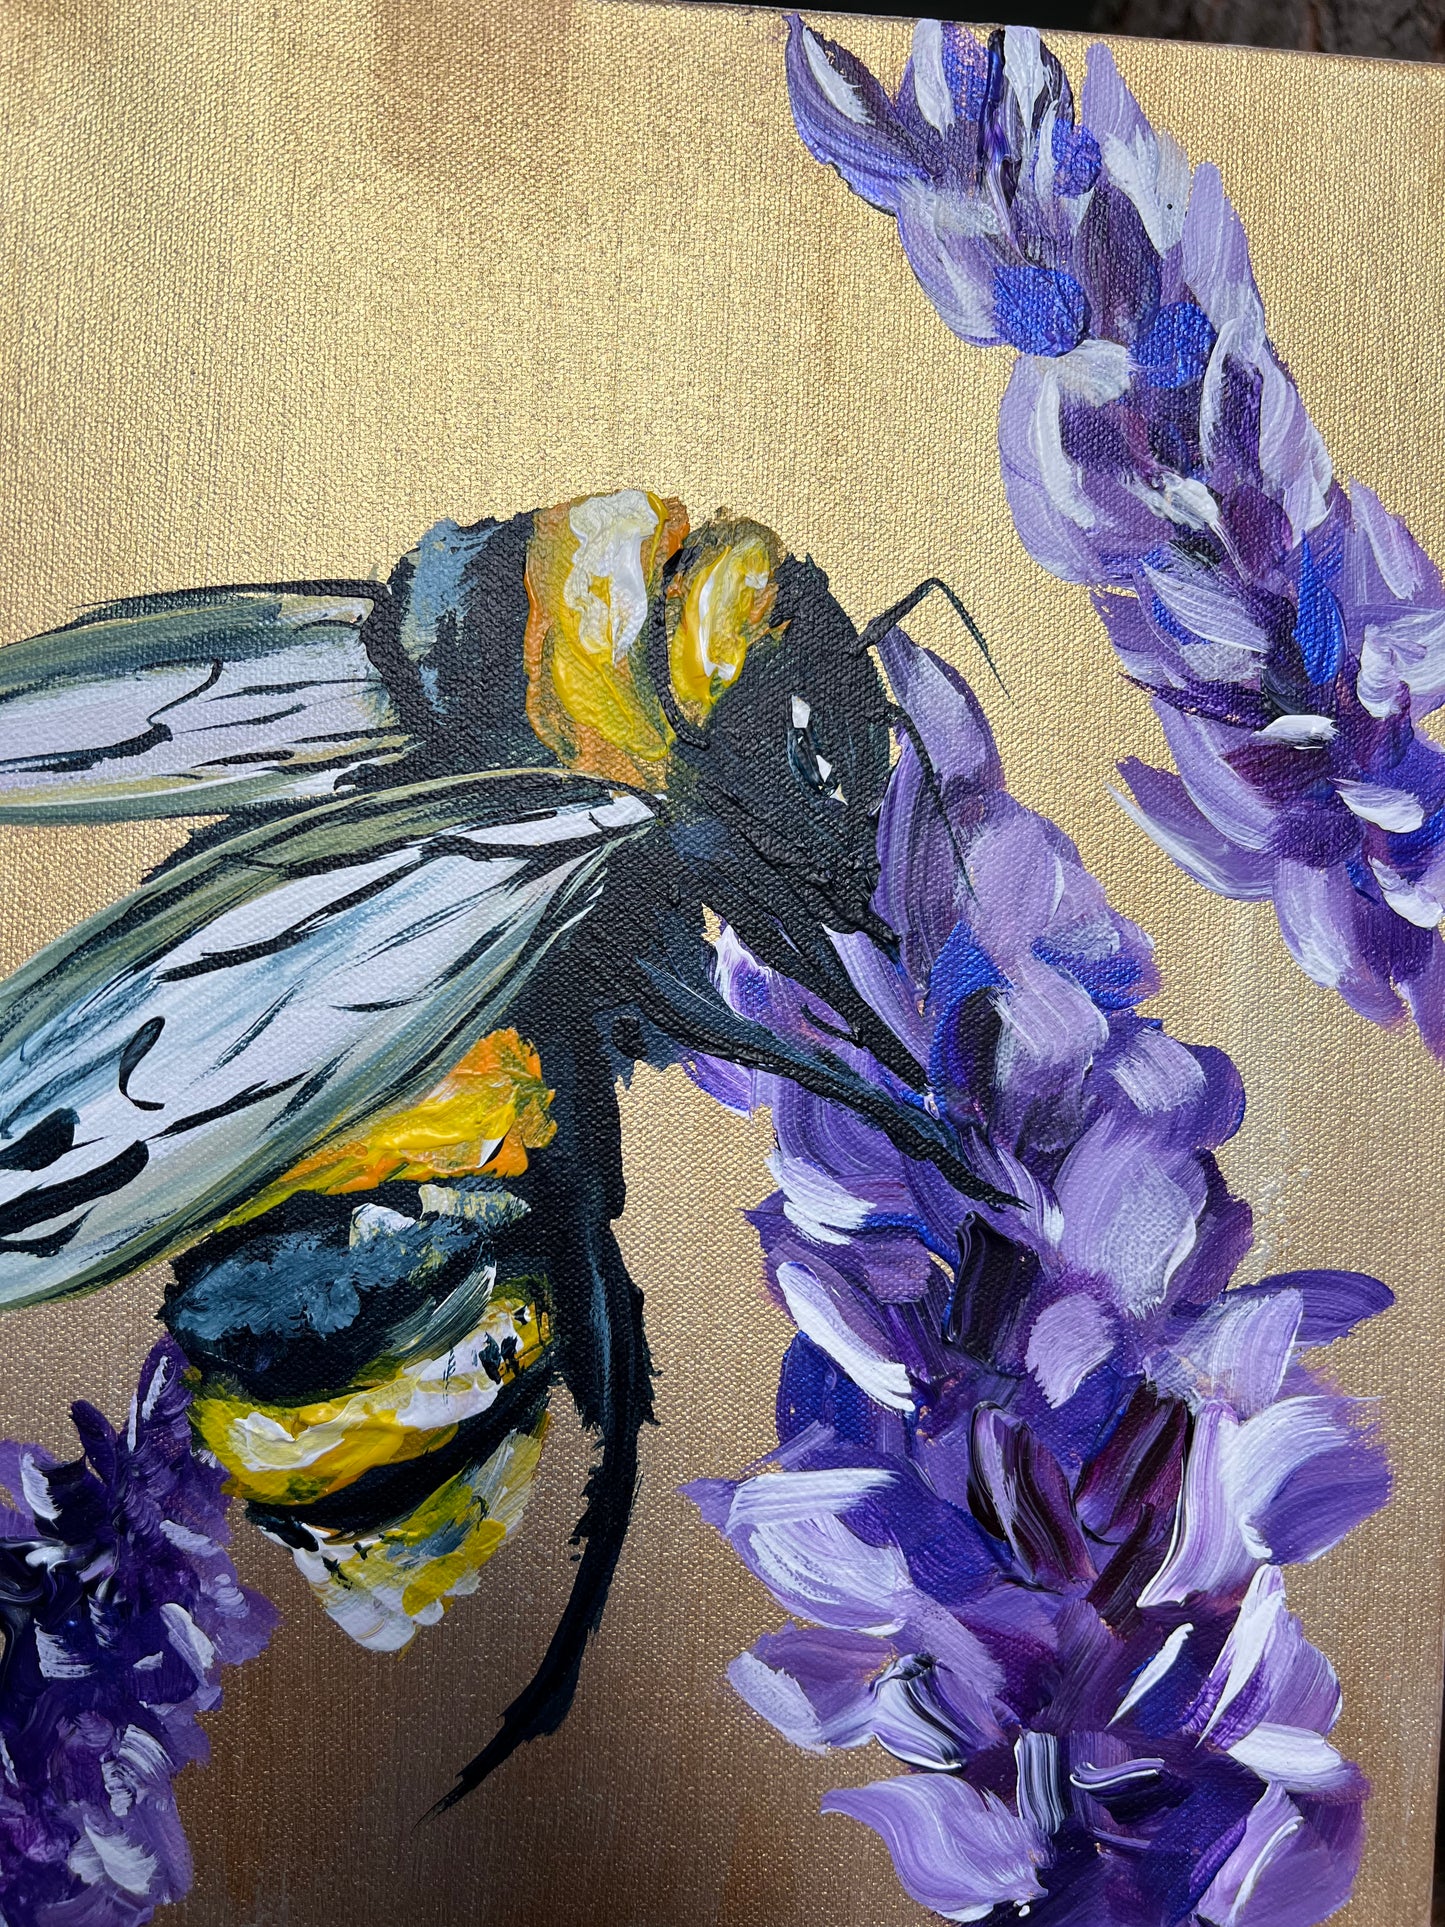 Nectar Delight, small lavender bees 12x12”